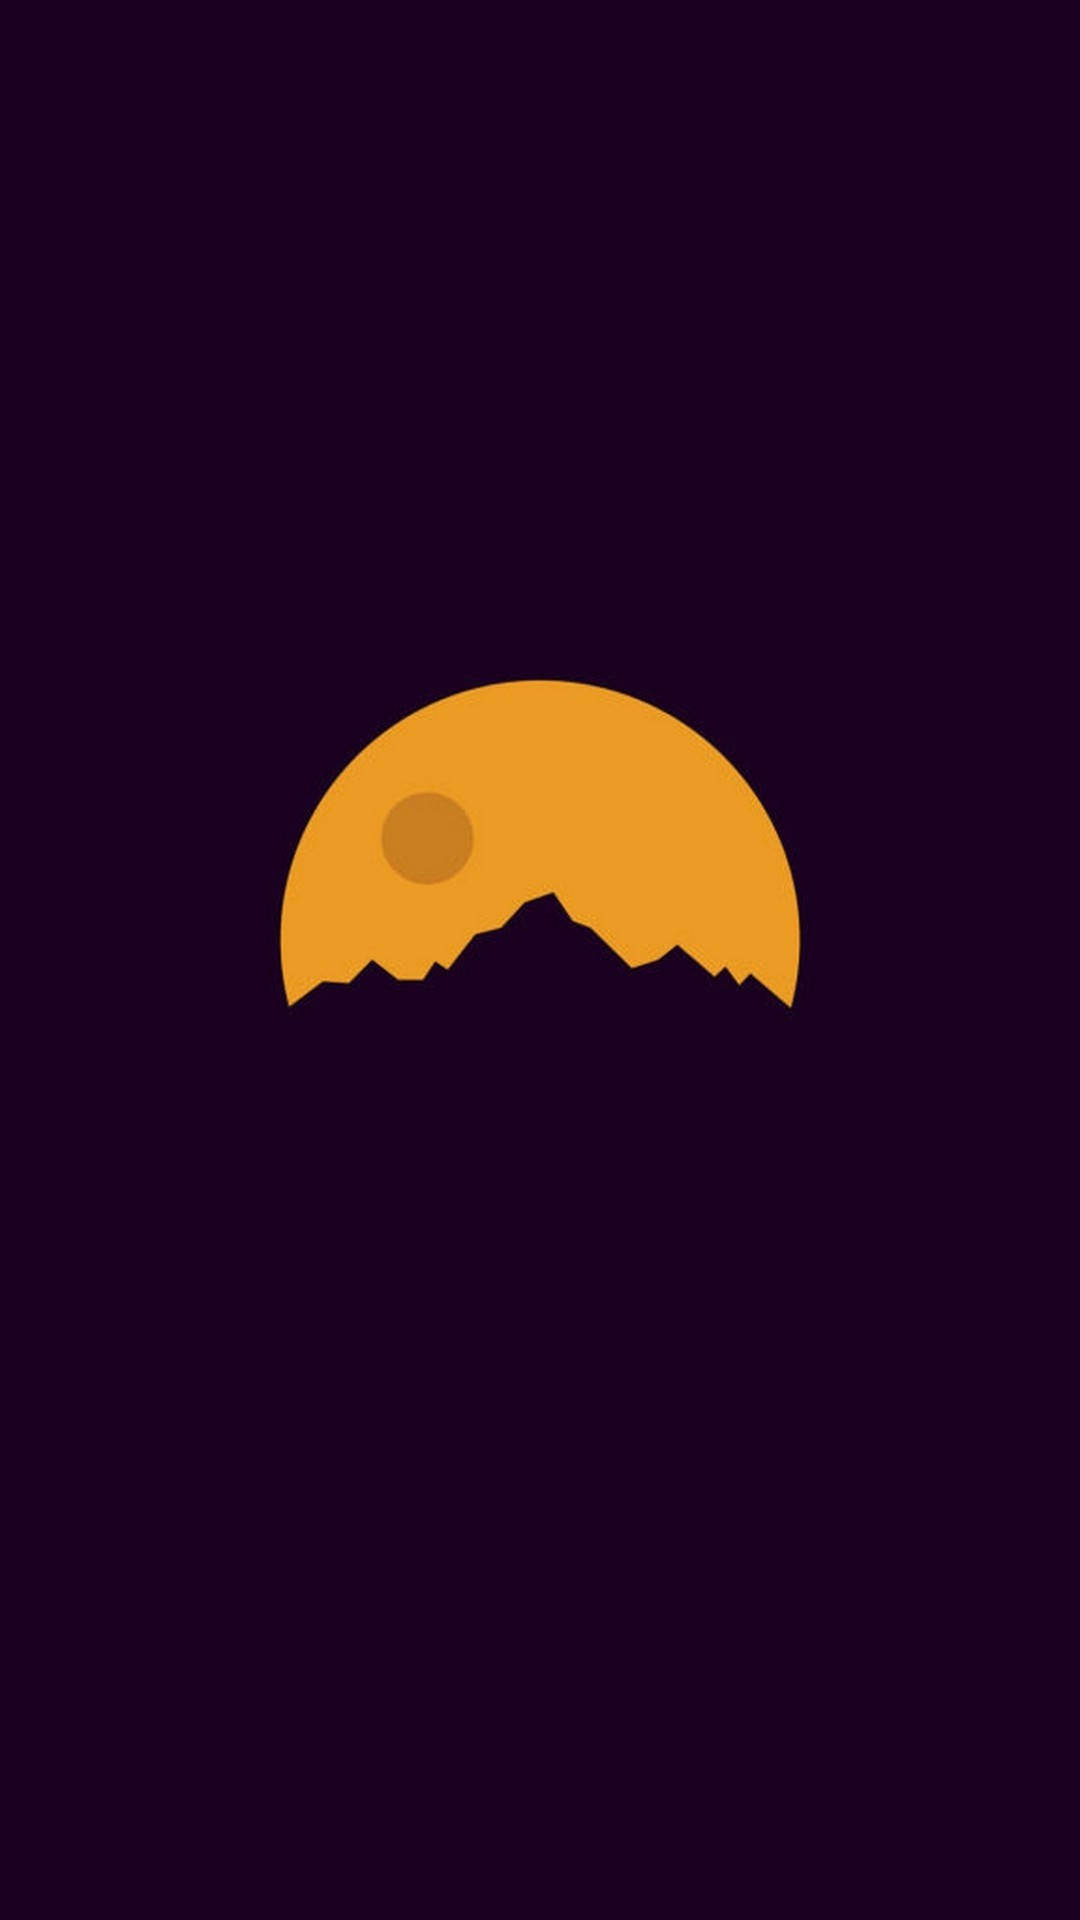 Simple Hd Mountain And Moon Background